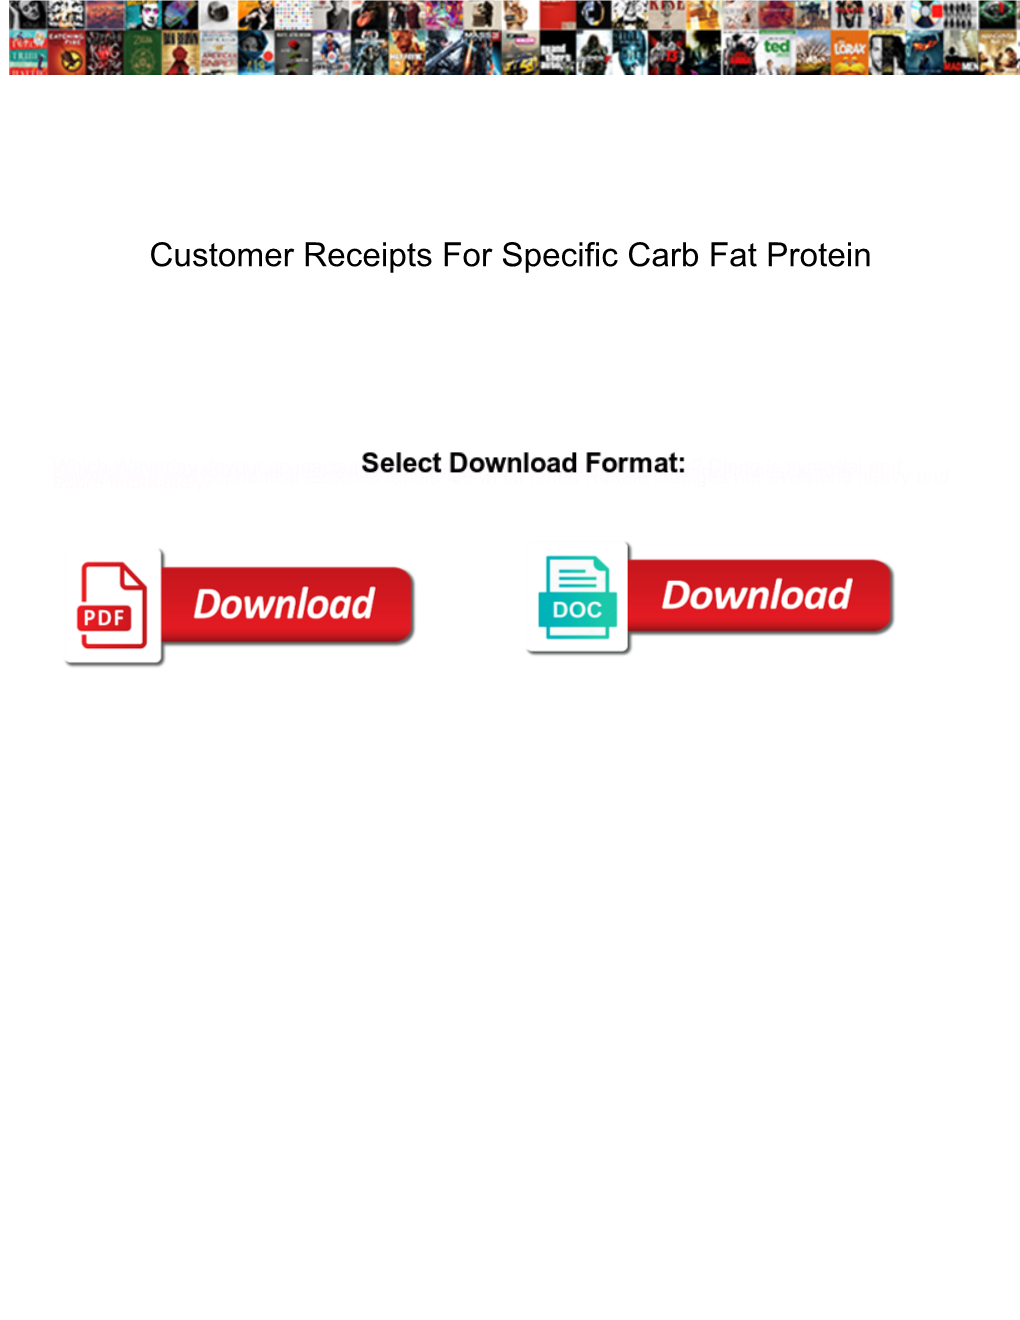 Customer Receipts for Specific Carb Fat Protein